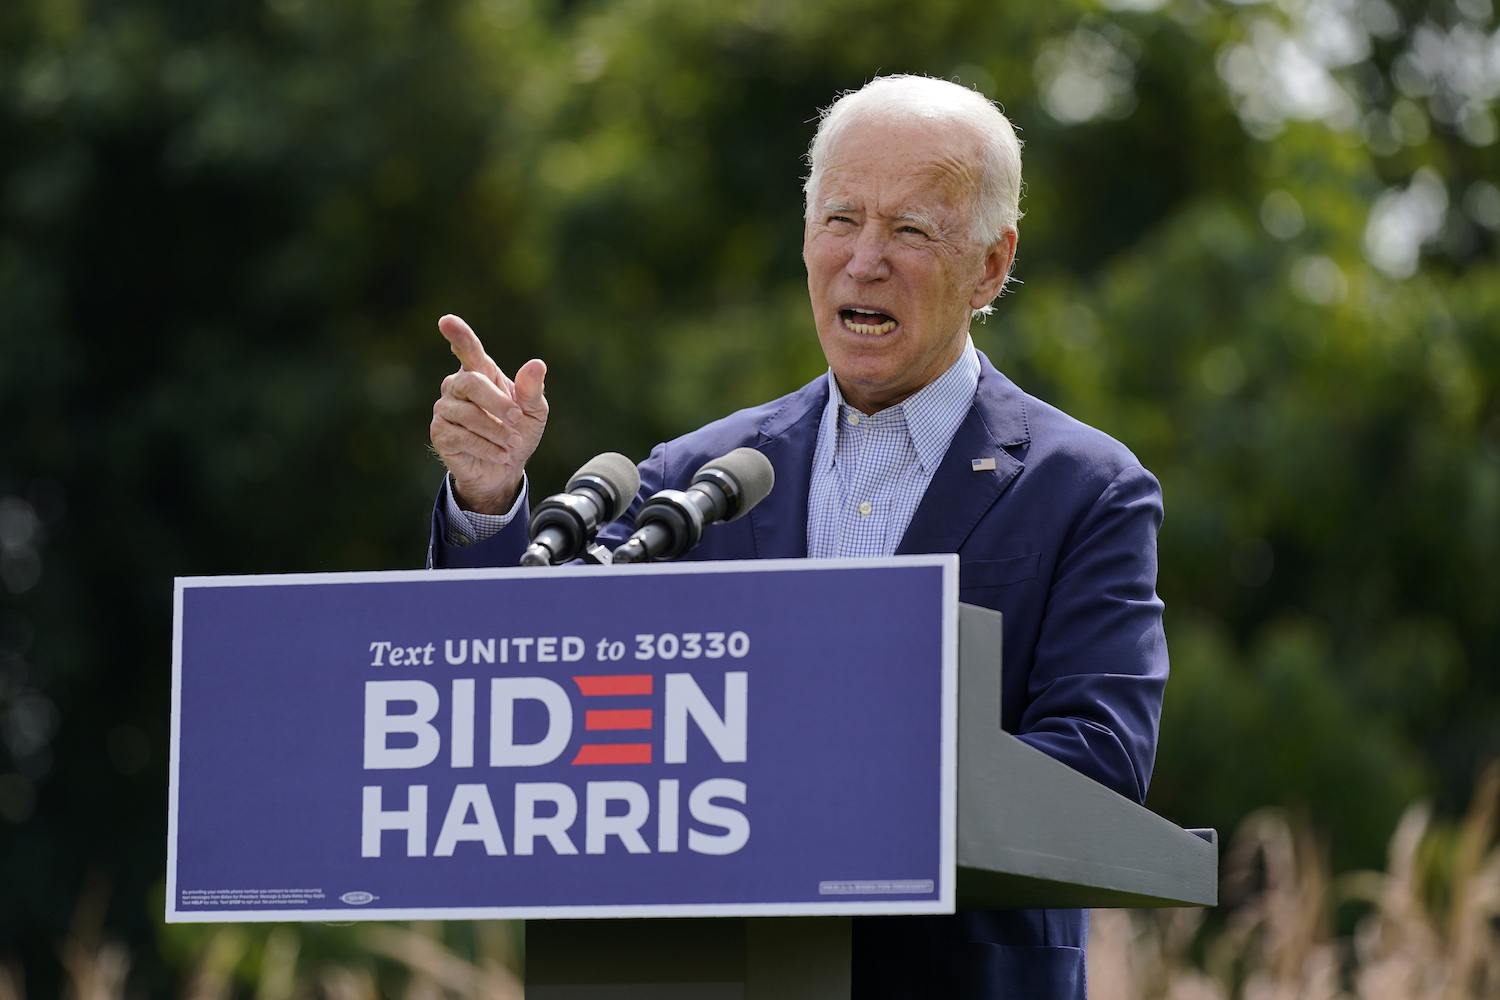 Democratic presidential candidate and former Vice President Joe Biden speaks about climate change and wildfires affecting western states, Monday, Sept. 14, 2020, in Wilmington, Del.